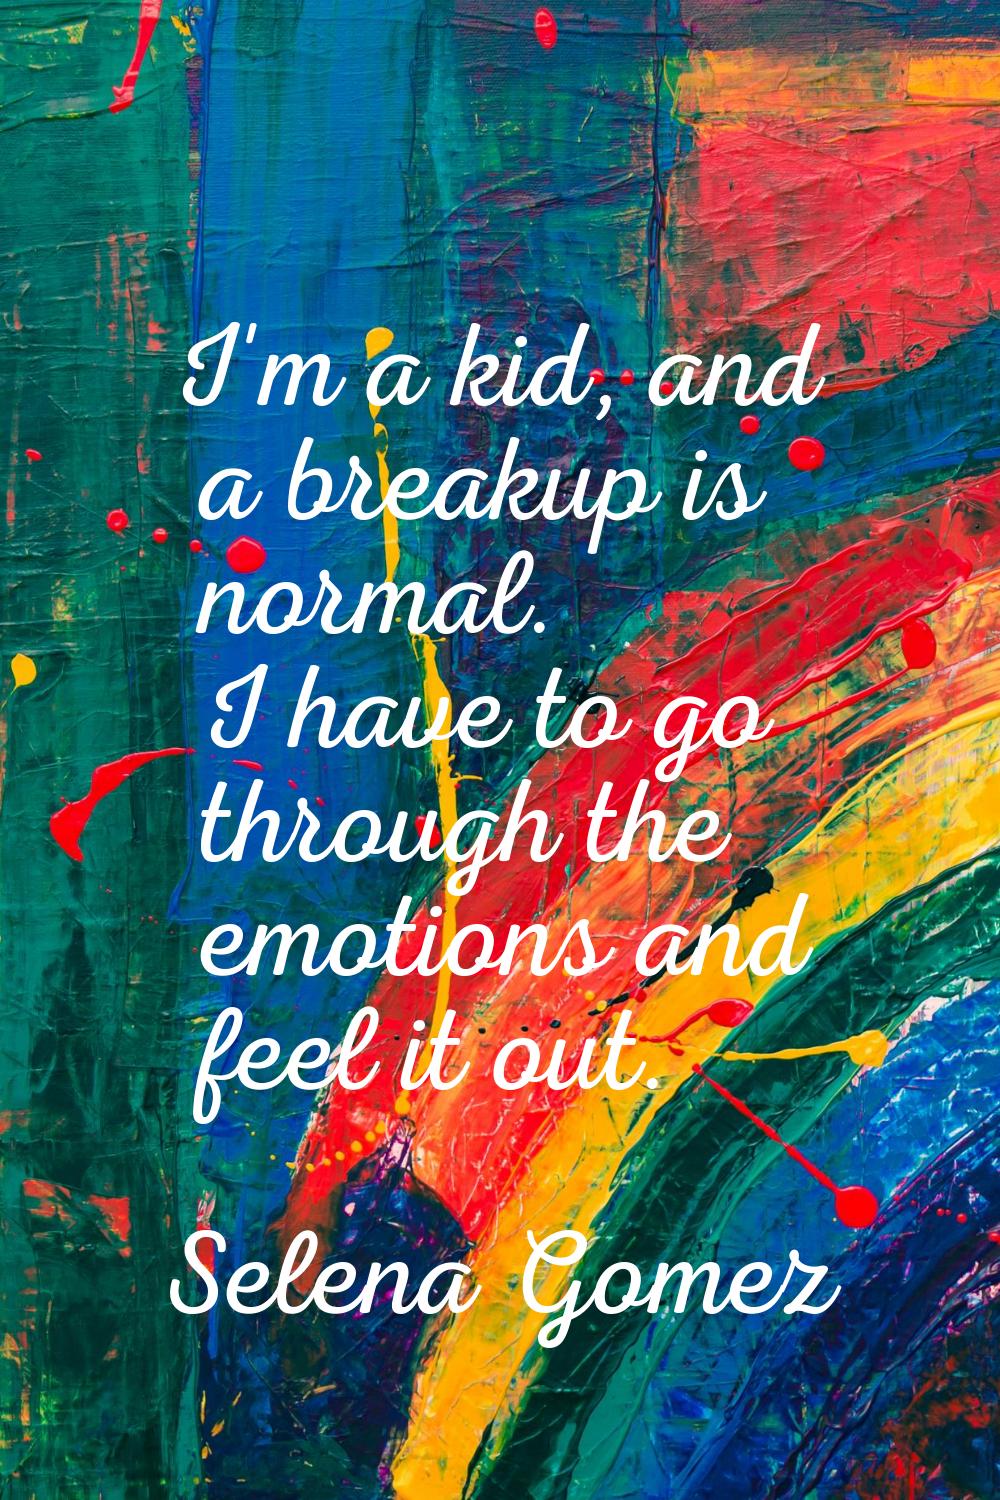 I'm a kid, and a breakup is normal. I have to go through the emotions and feel it out.